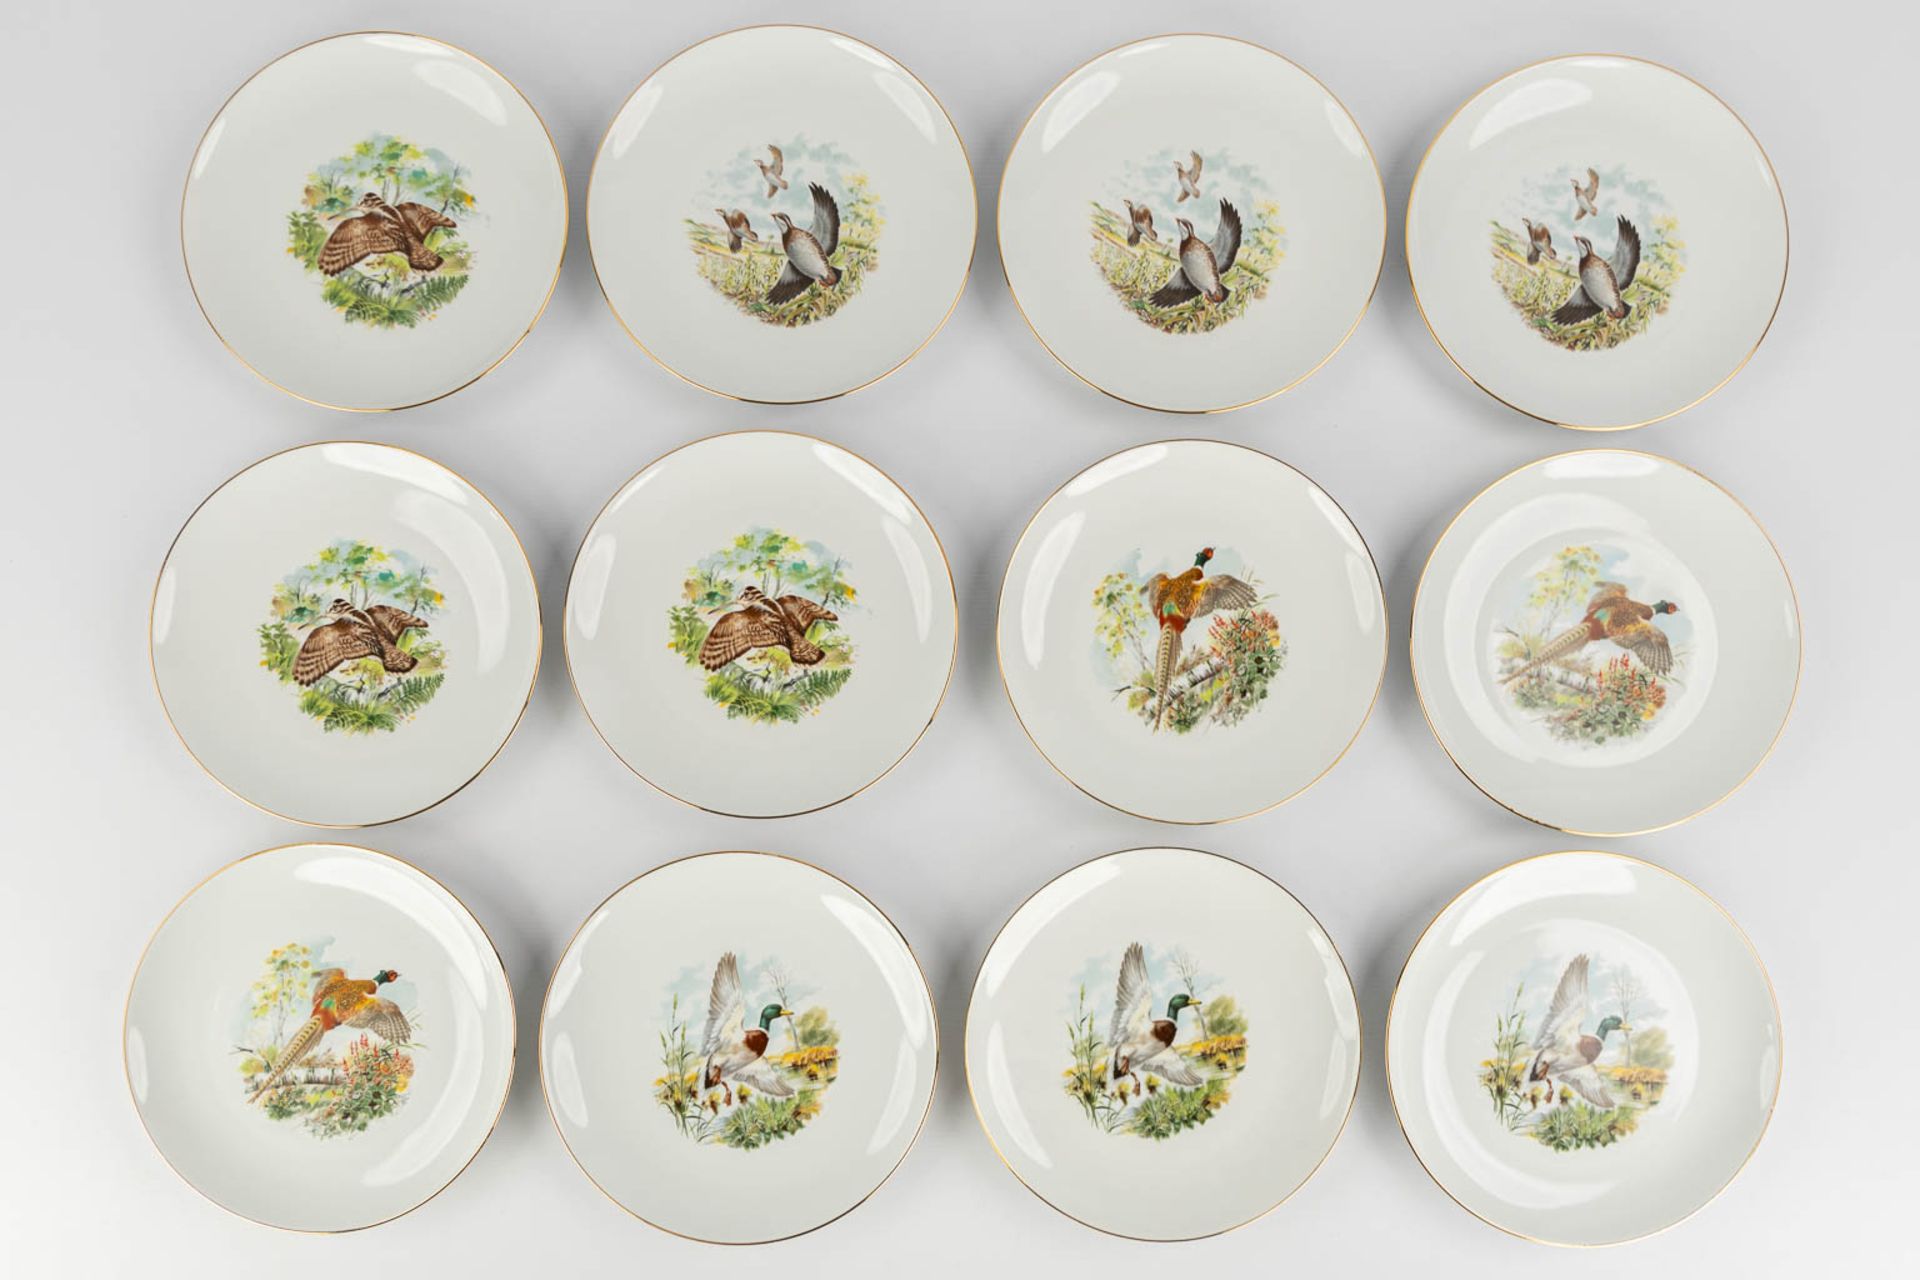 Limoges, France, a large, 12-person dinner, wild and coffee service. (L:23 x W:34 x H:22 cm) - Image 23 of 28